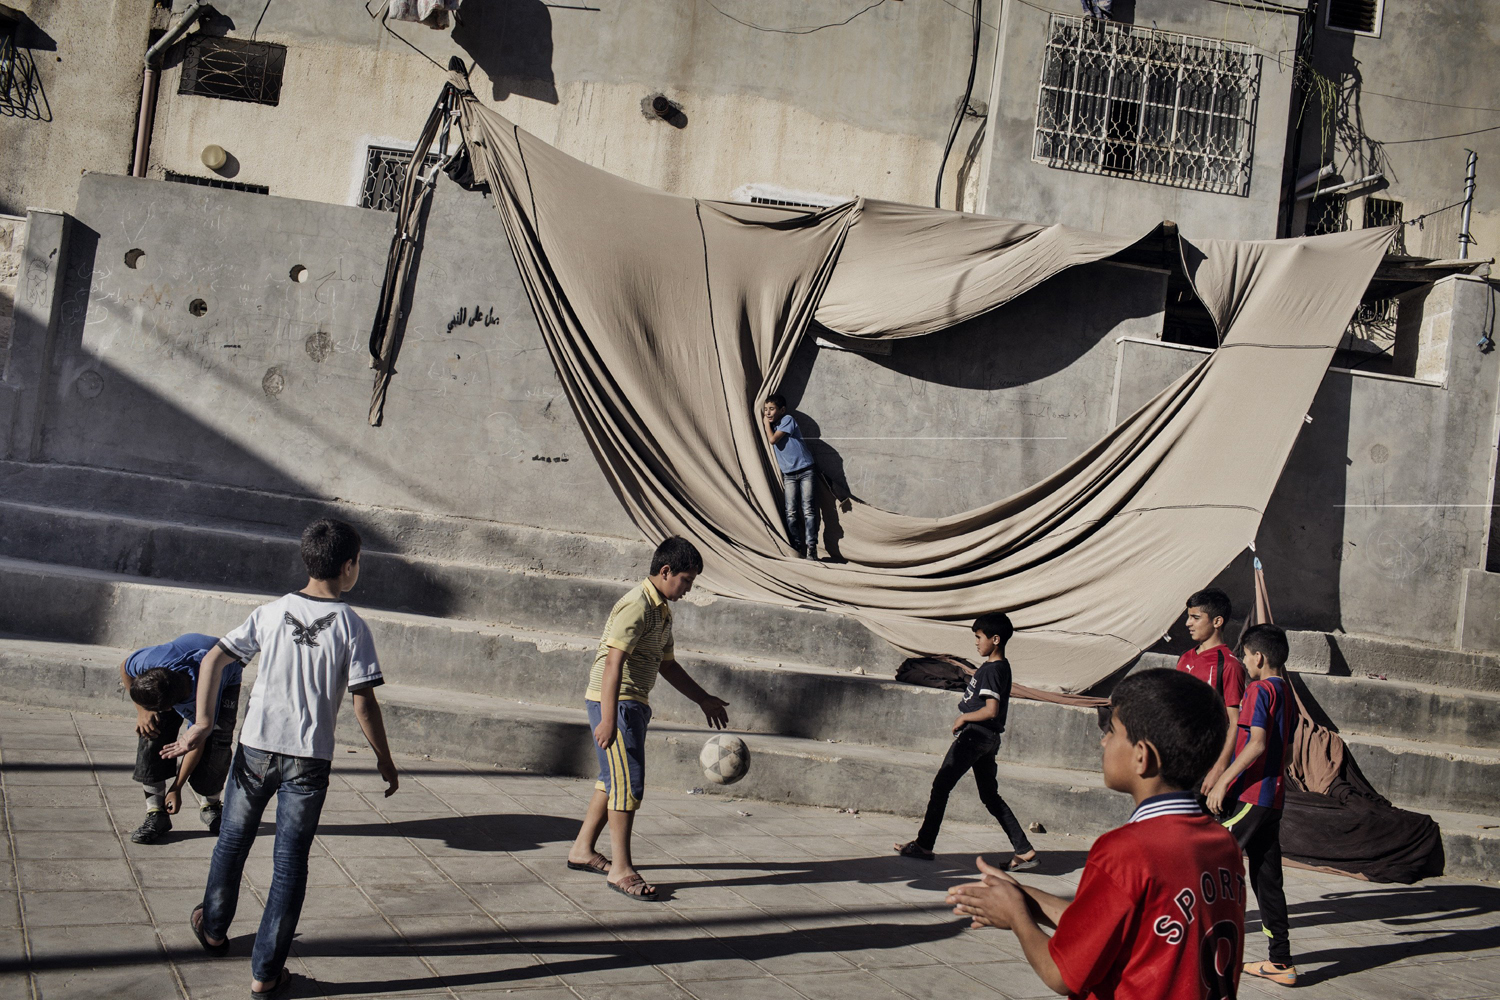 Children play soccer in a plaza in Al Fawwar, a Palestinian refugee camp in the West Bank, June 15, 2014.